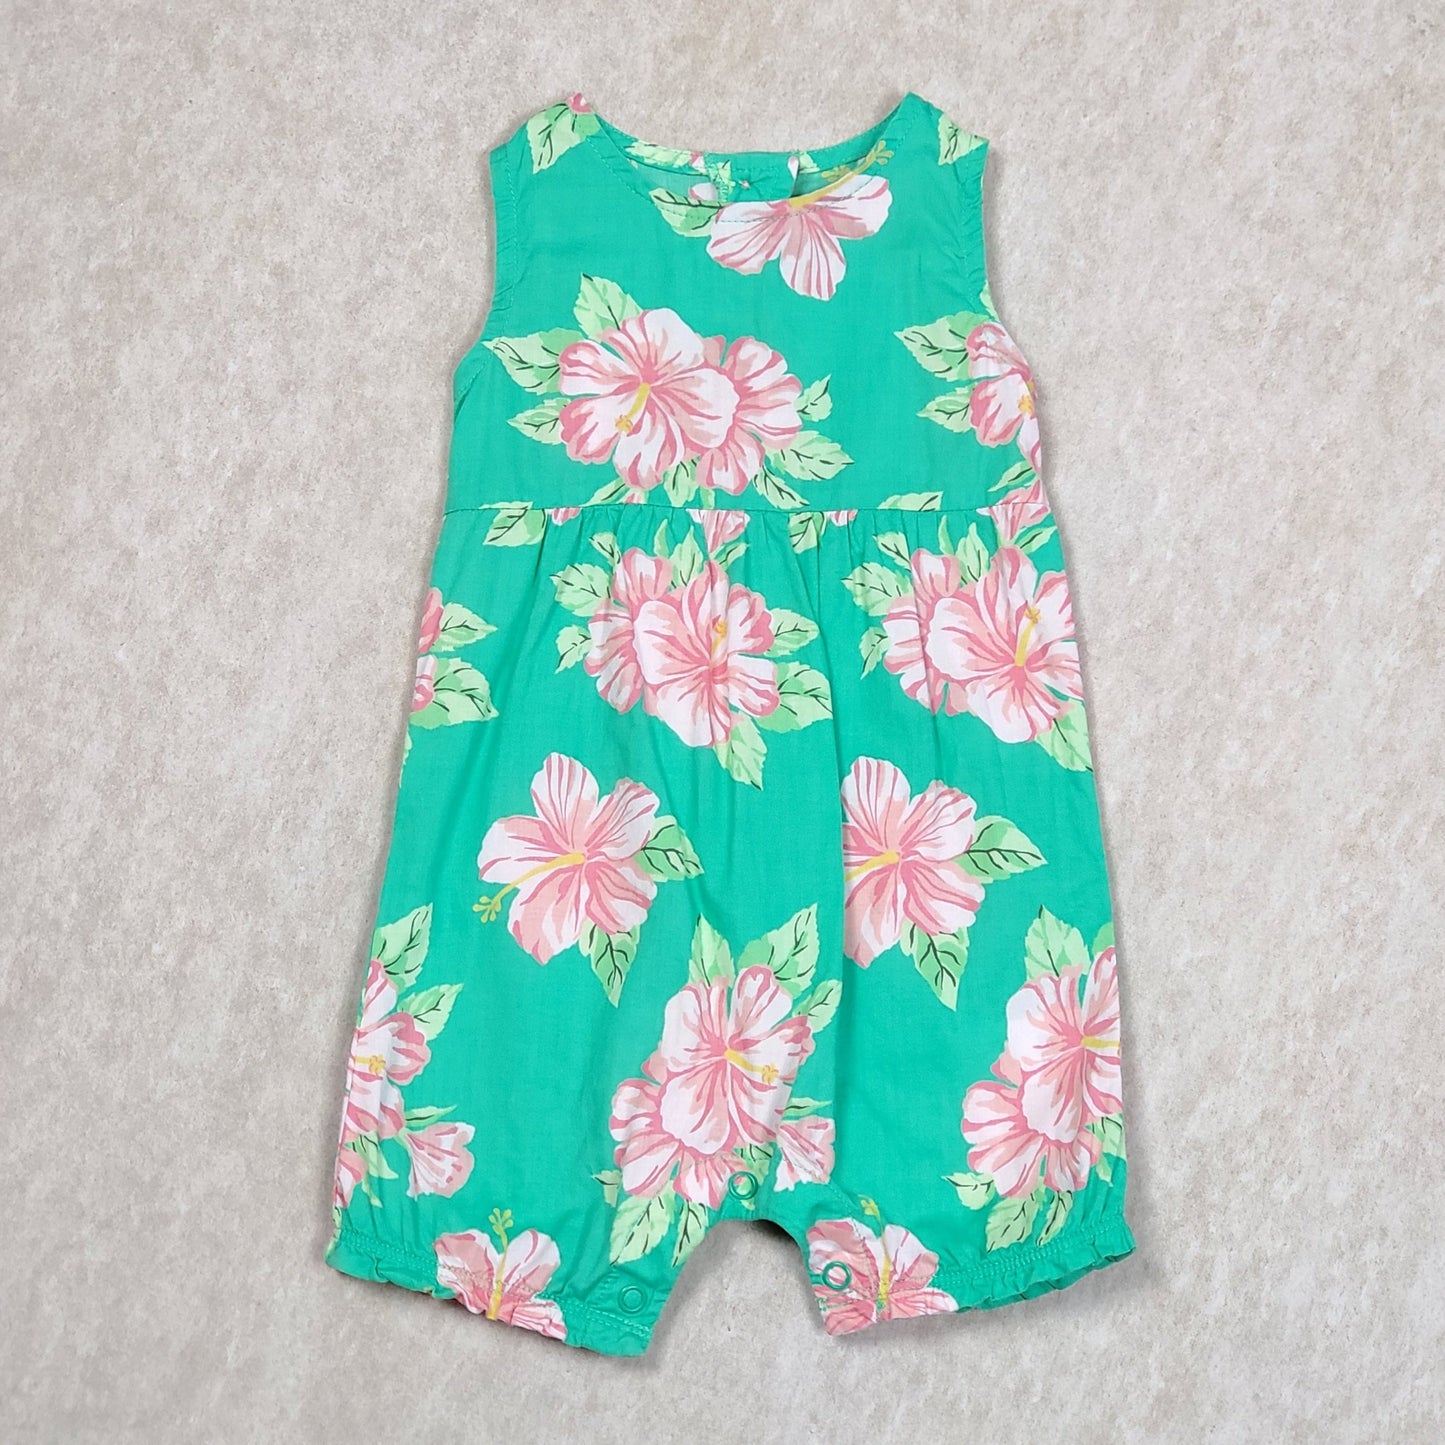 Carters Girls Green Floral Romper 6M Used View 1